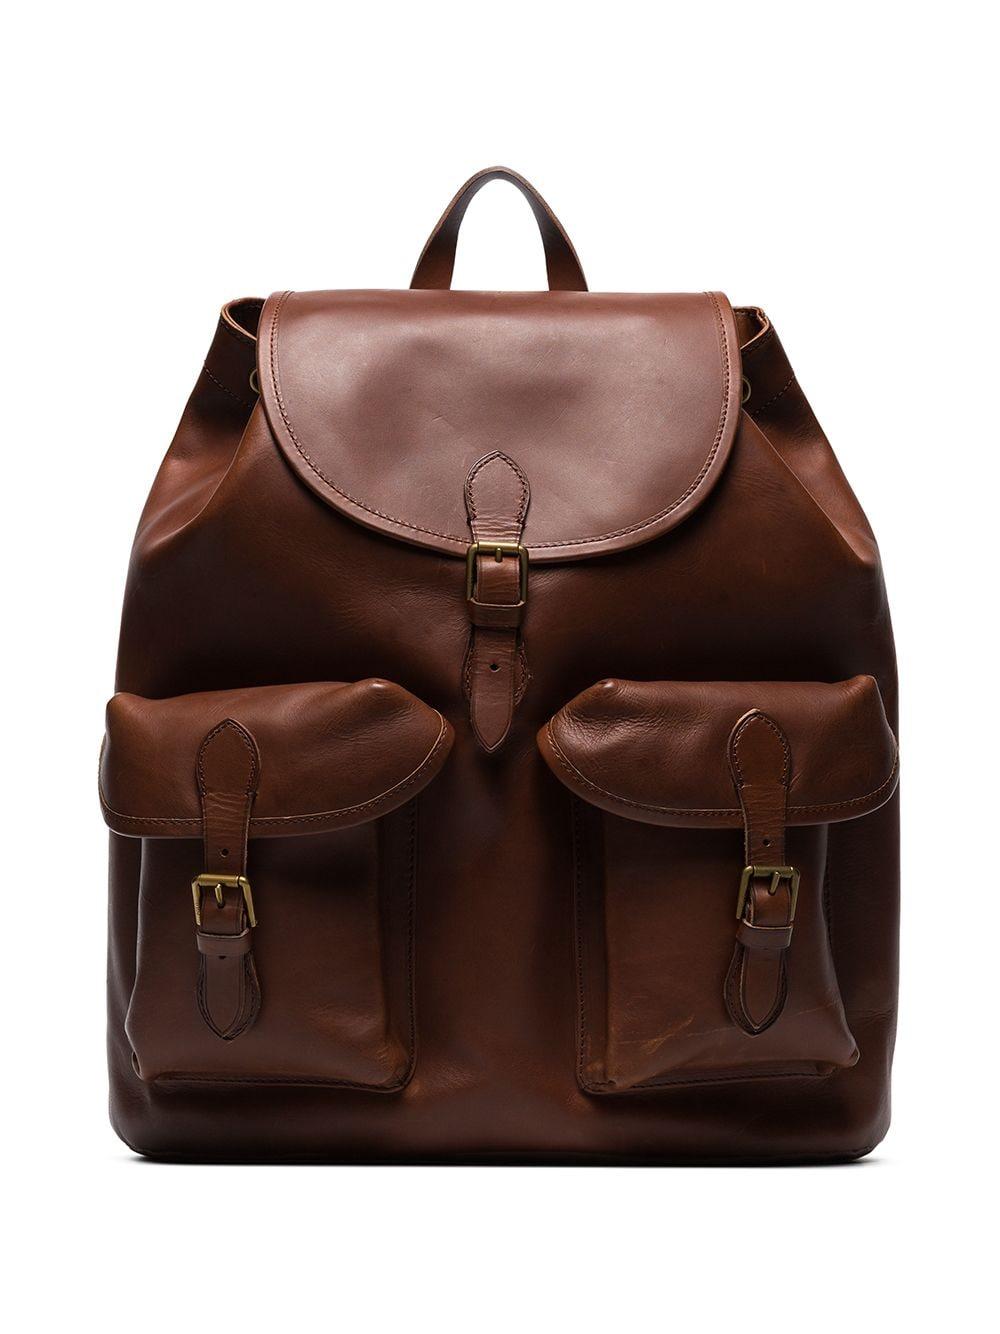 polo backpack leather